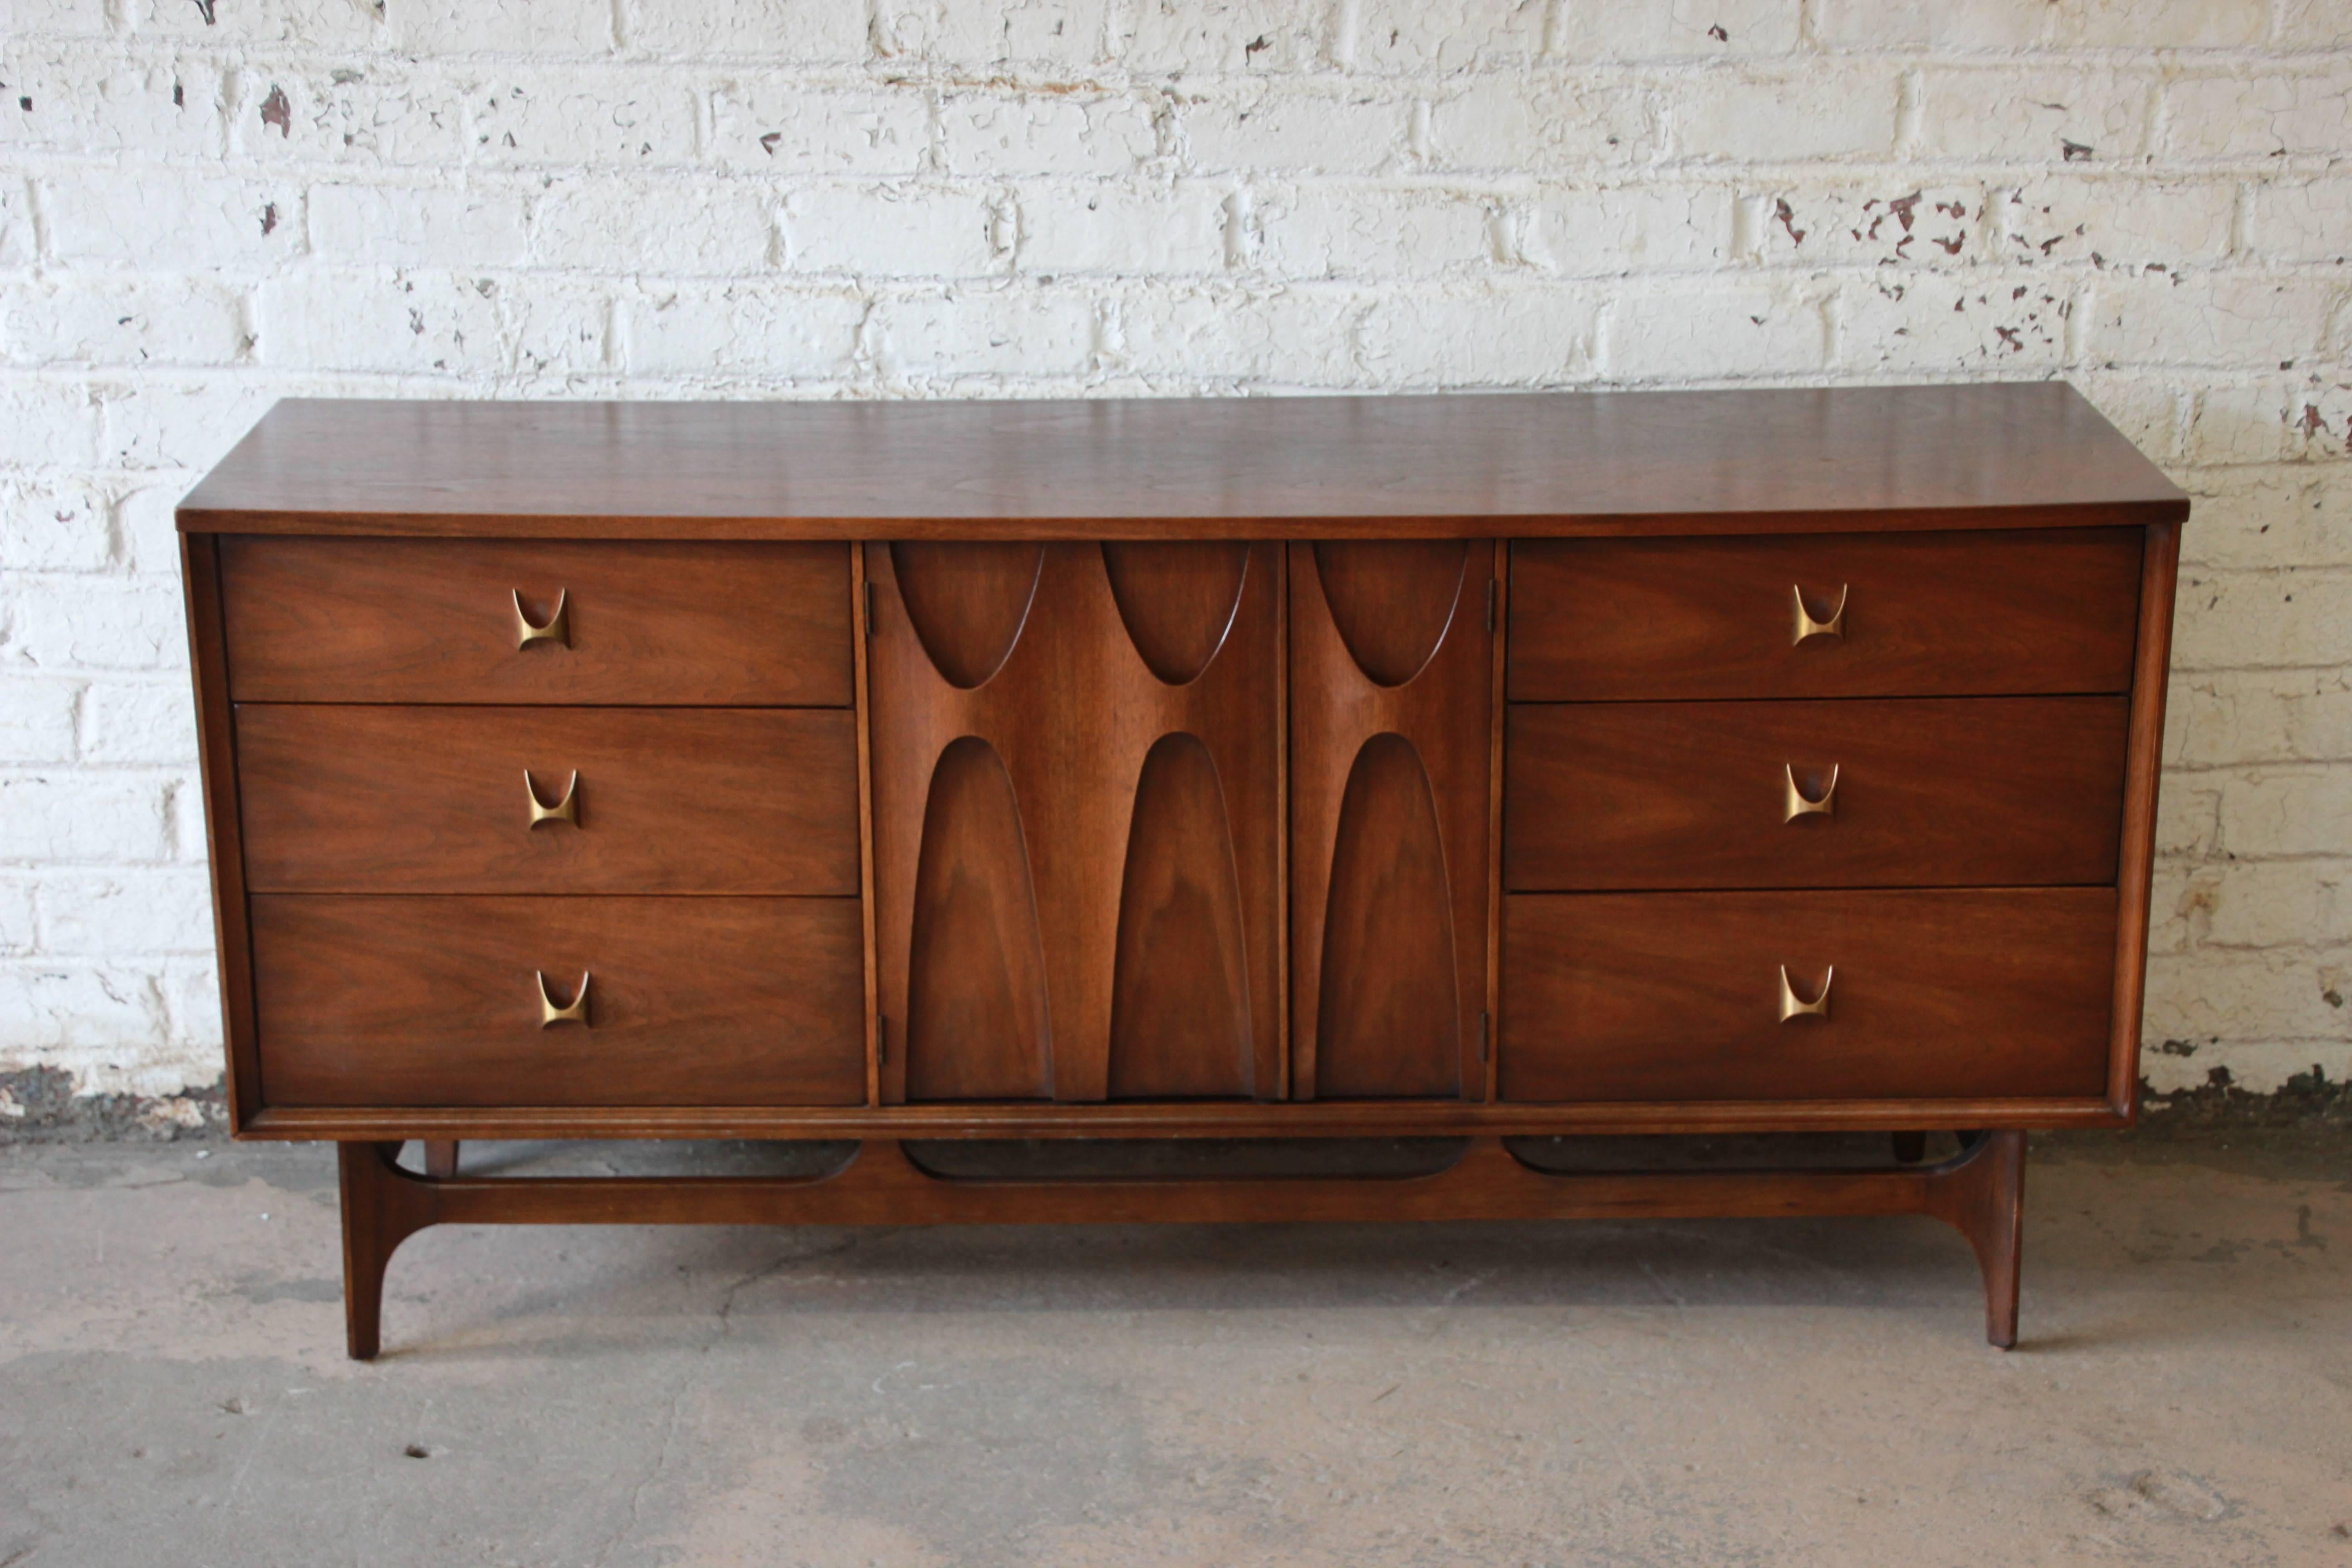 Offering the iconic designed Broyhill Brasilia nine-drawer dresser. The dresser has sculpted arches and original pulls. The centre sculpted cabinet doors open up to three drawers with an additional three large drawers on each side. The dresser is in